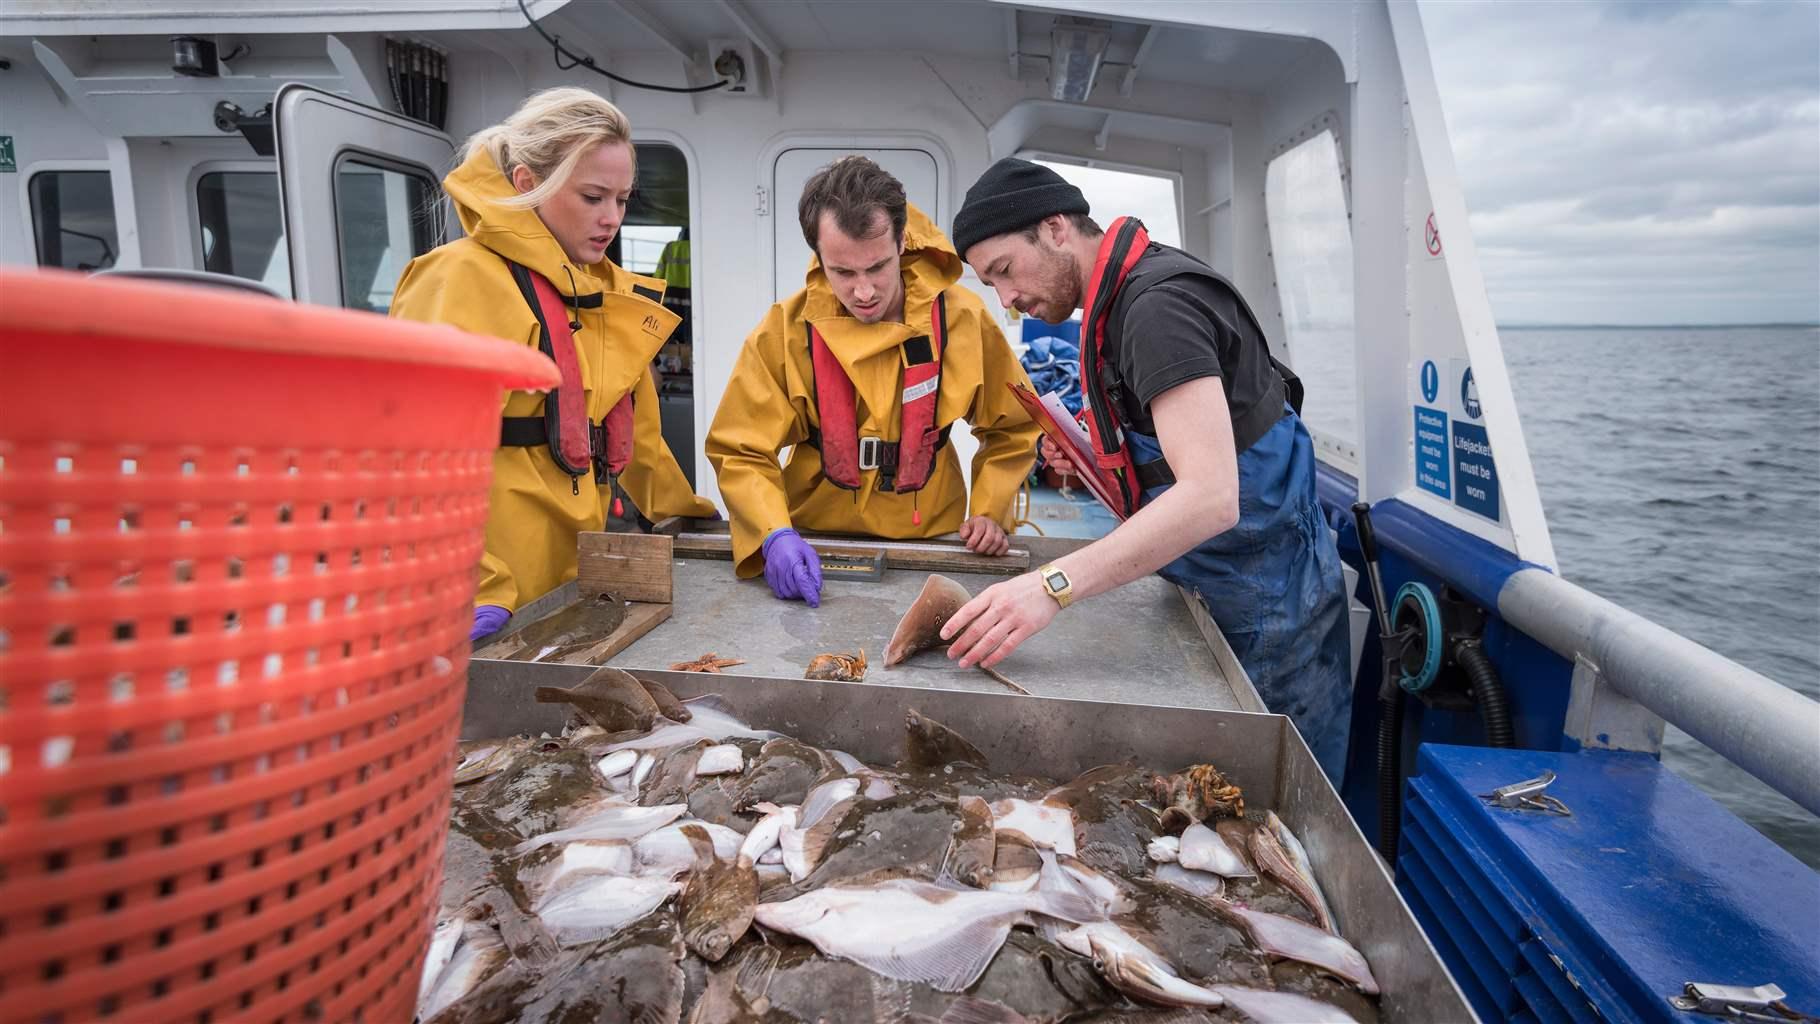 Three people, dressed in yellow, black, red and blue rain gear, stand on the deck of a white and blue boat and examine a fish on a table. A pile of fish is in a metal bin in the foreground.